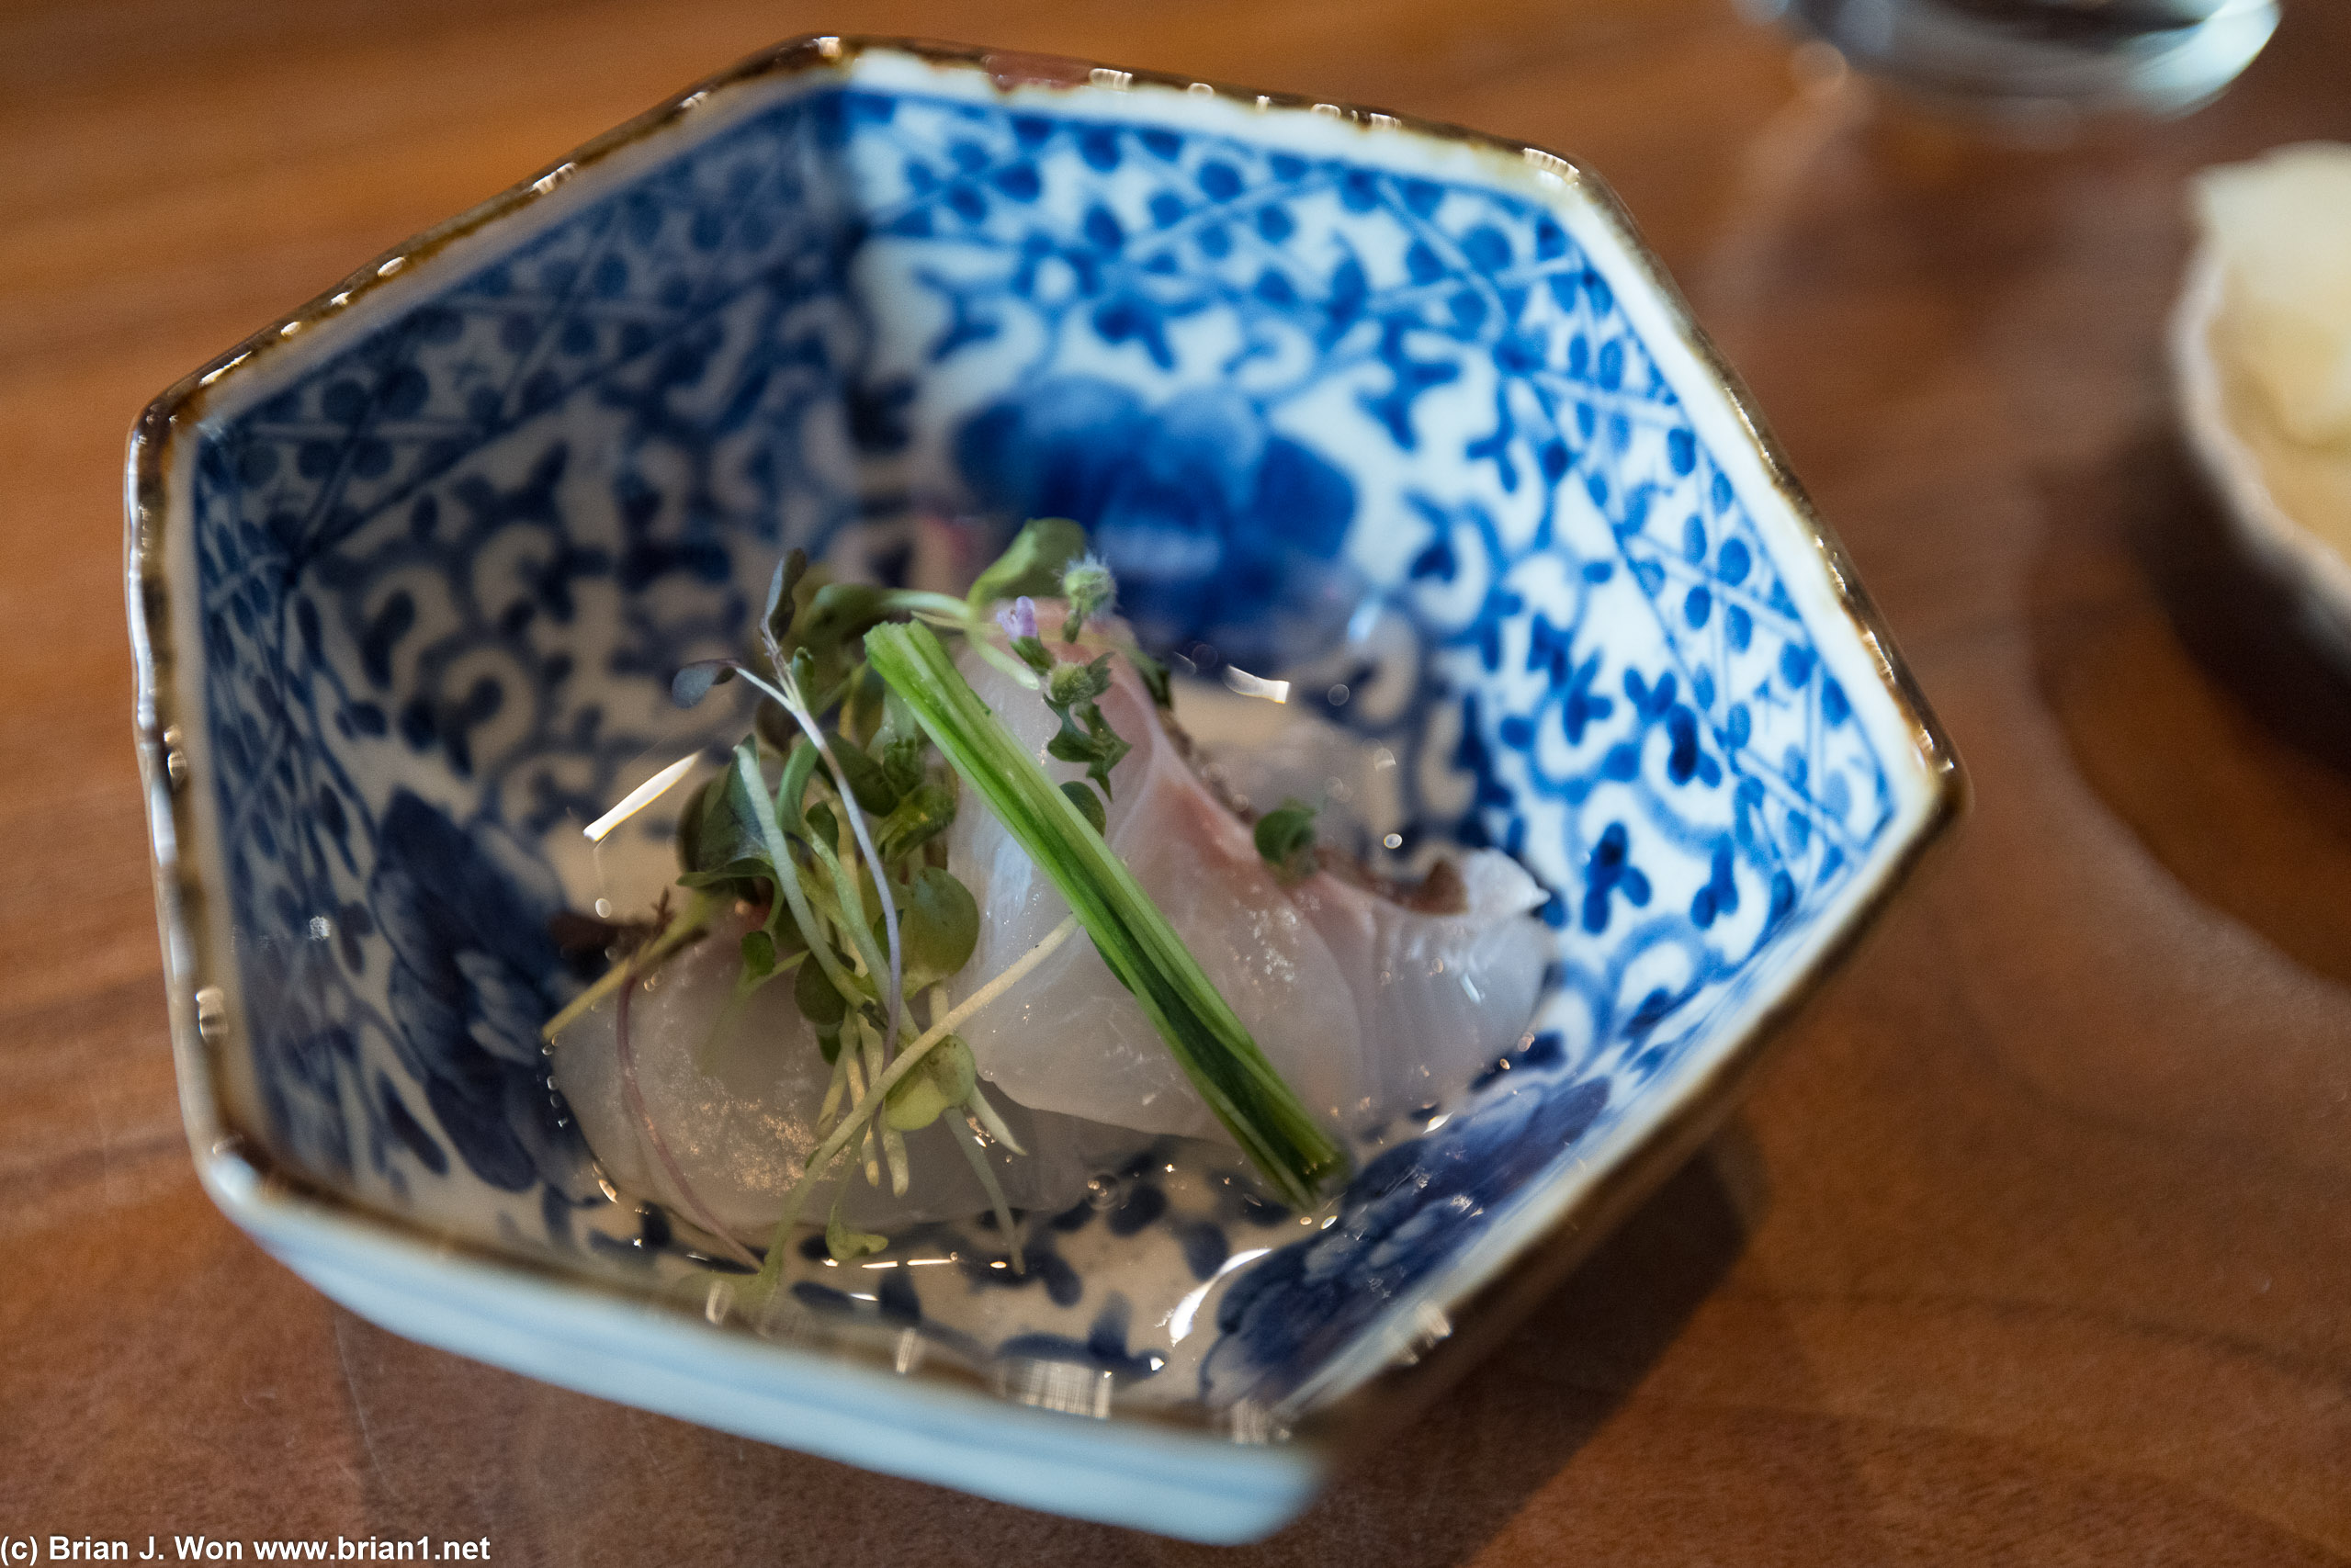 Madai (Japanese red snapper) sashimi with microgreens and clear soy sauce.